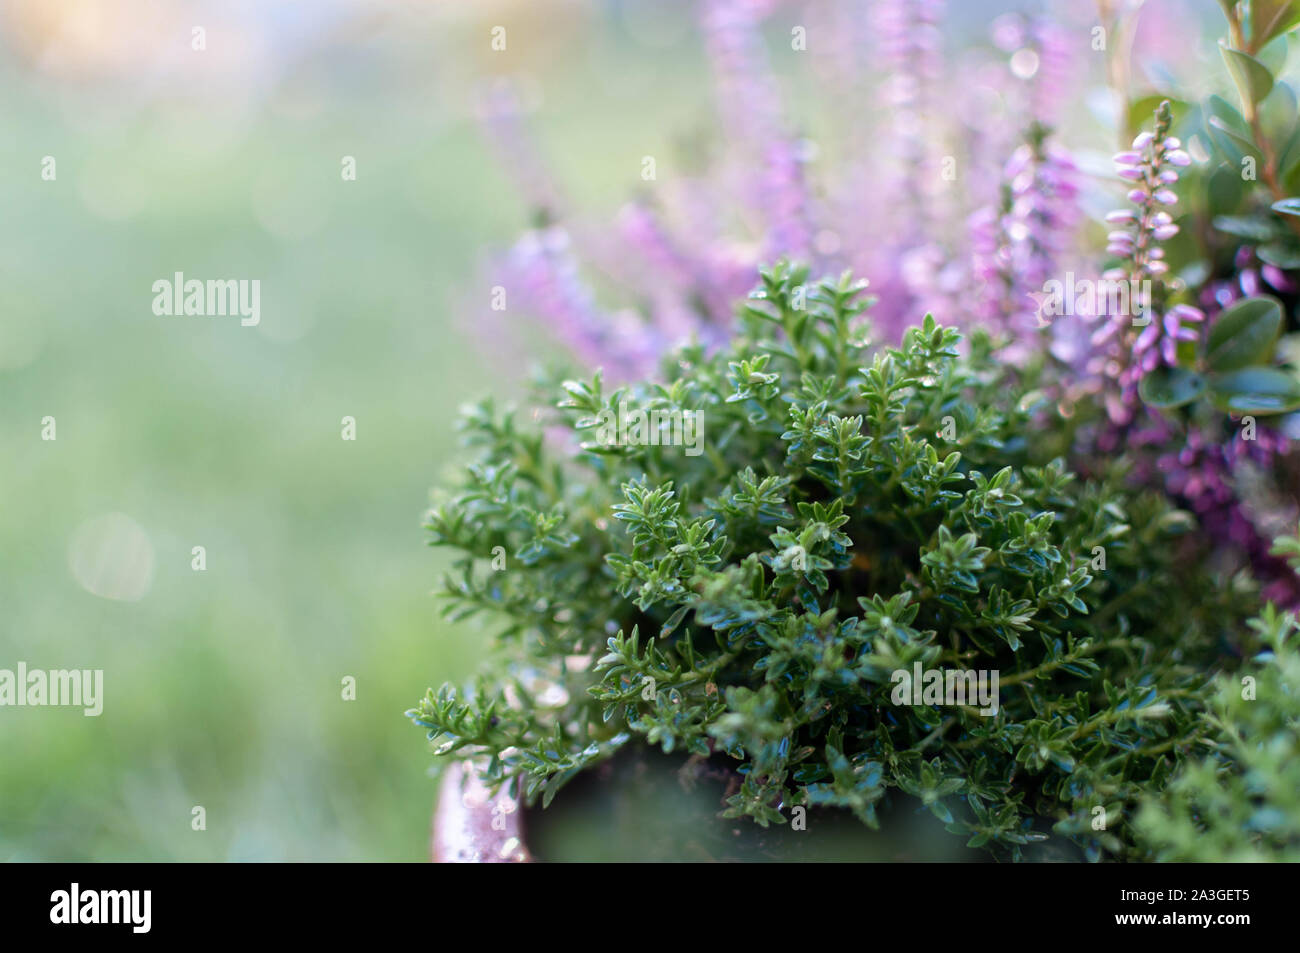 Erica and thyme plants composition, winter flowers close up. Symbol of winter cold time and holidays. Stock Photo